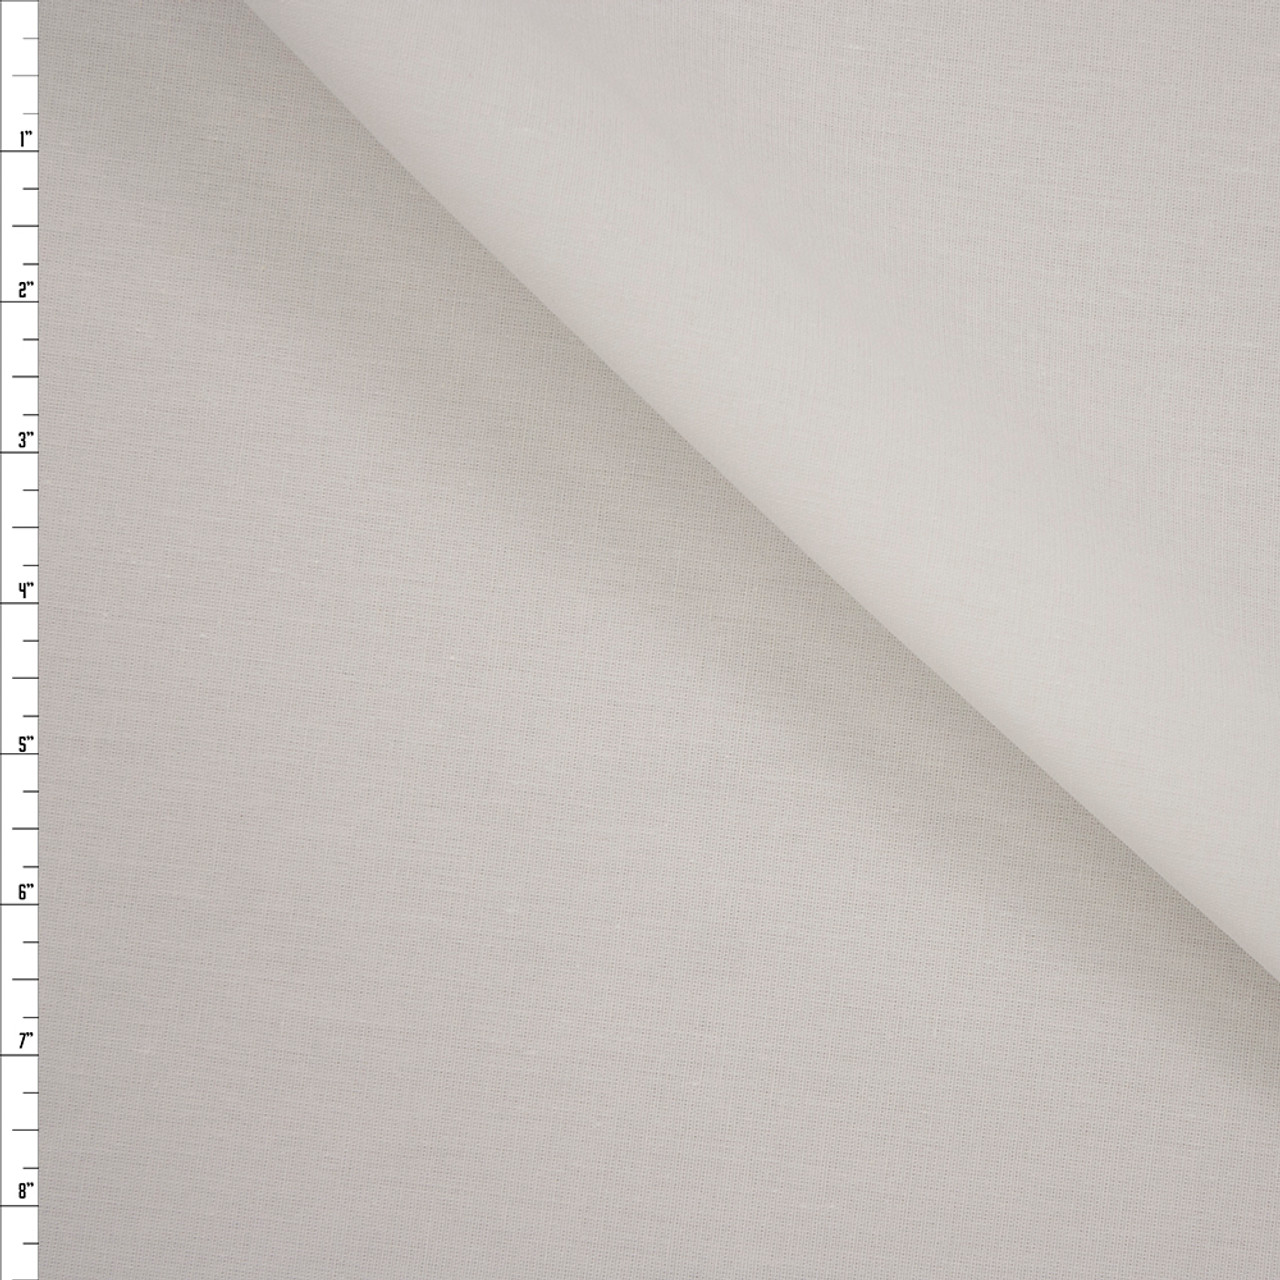 Cali Fabrics Ivory Midweight High Count Muslin Fabric by the Yard